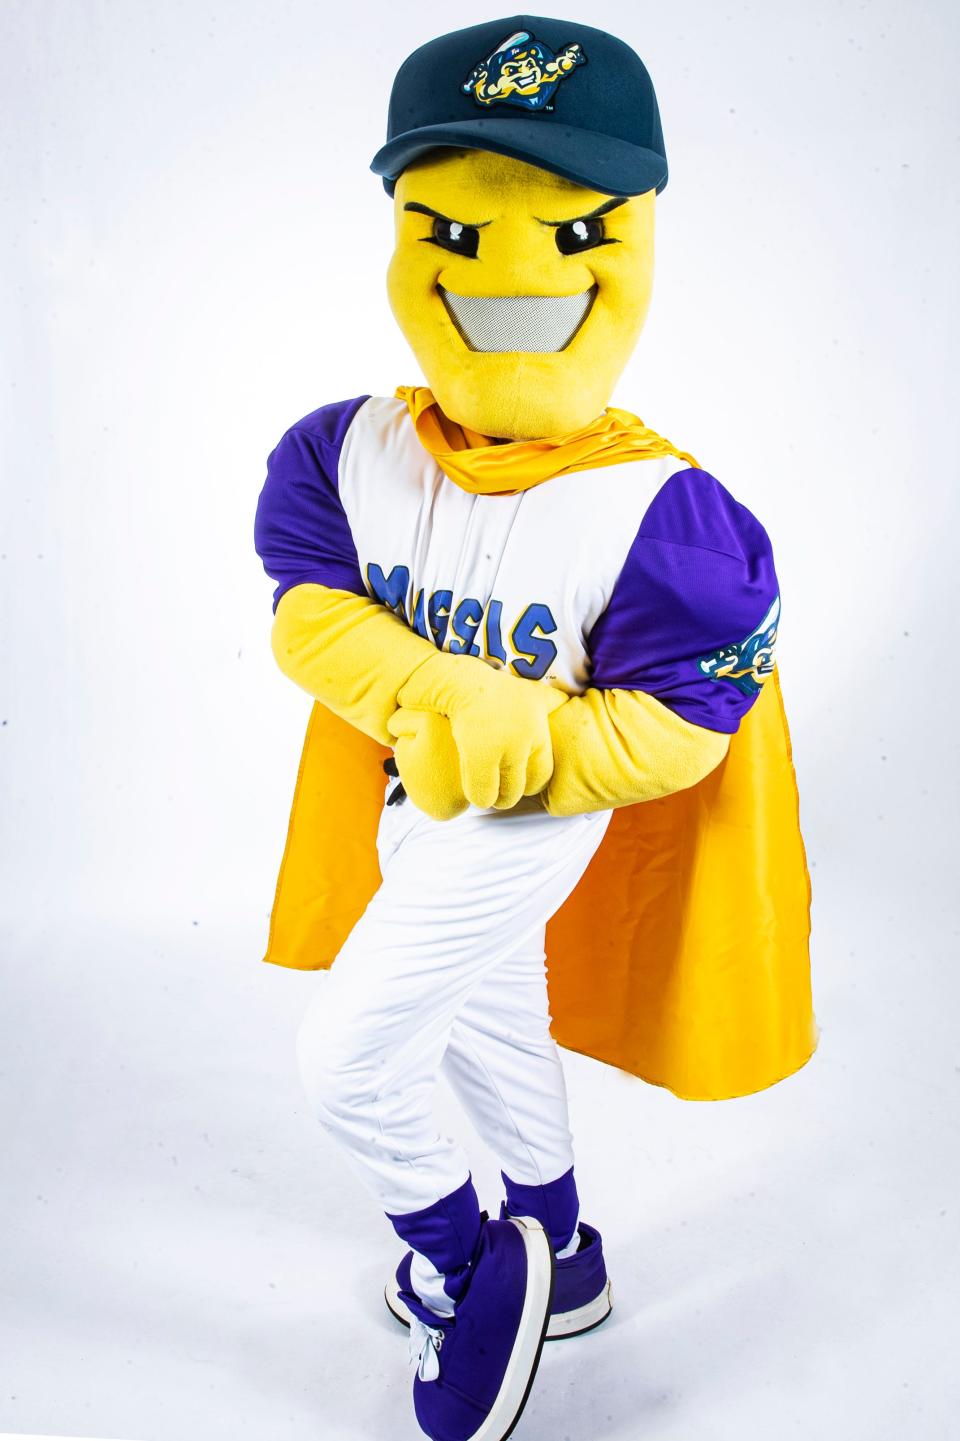 The Mighty Mussels mascot.  